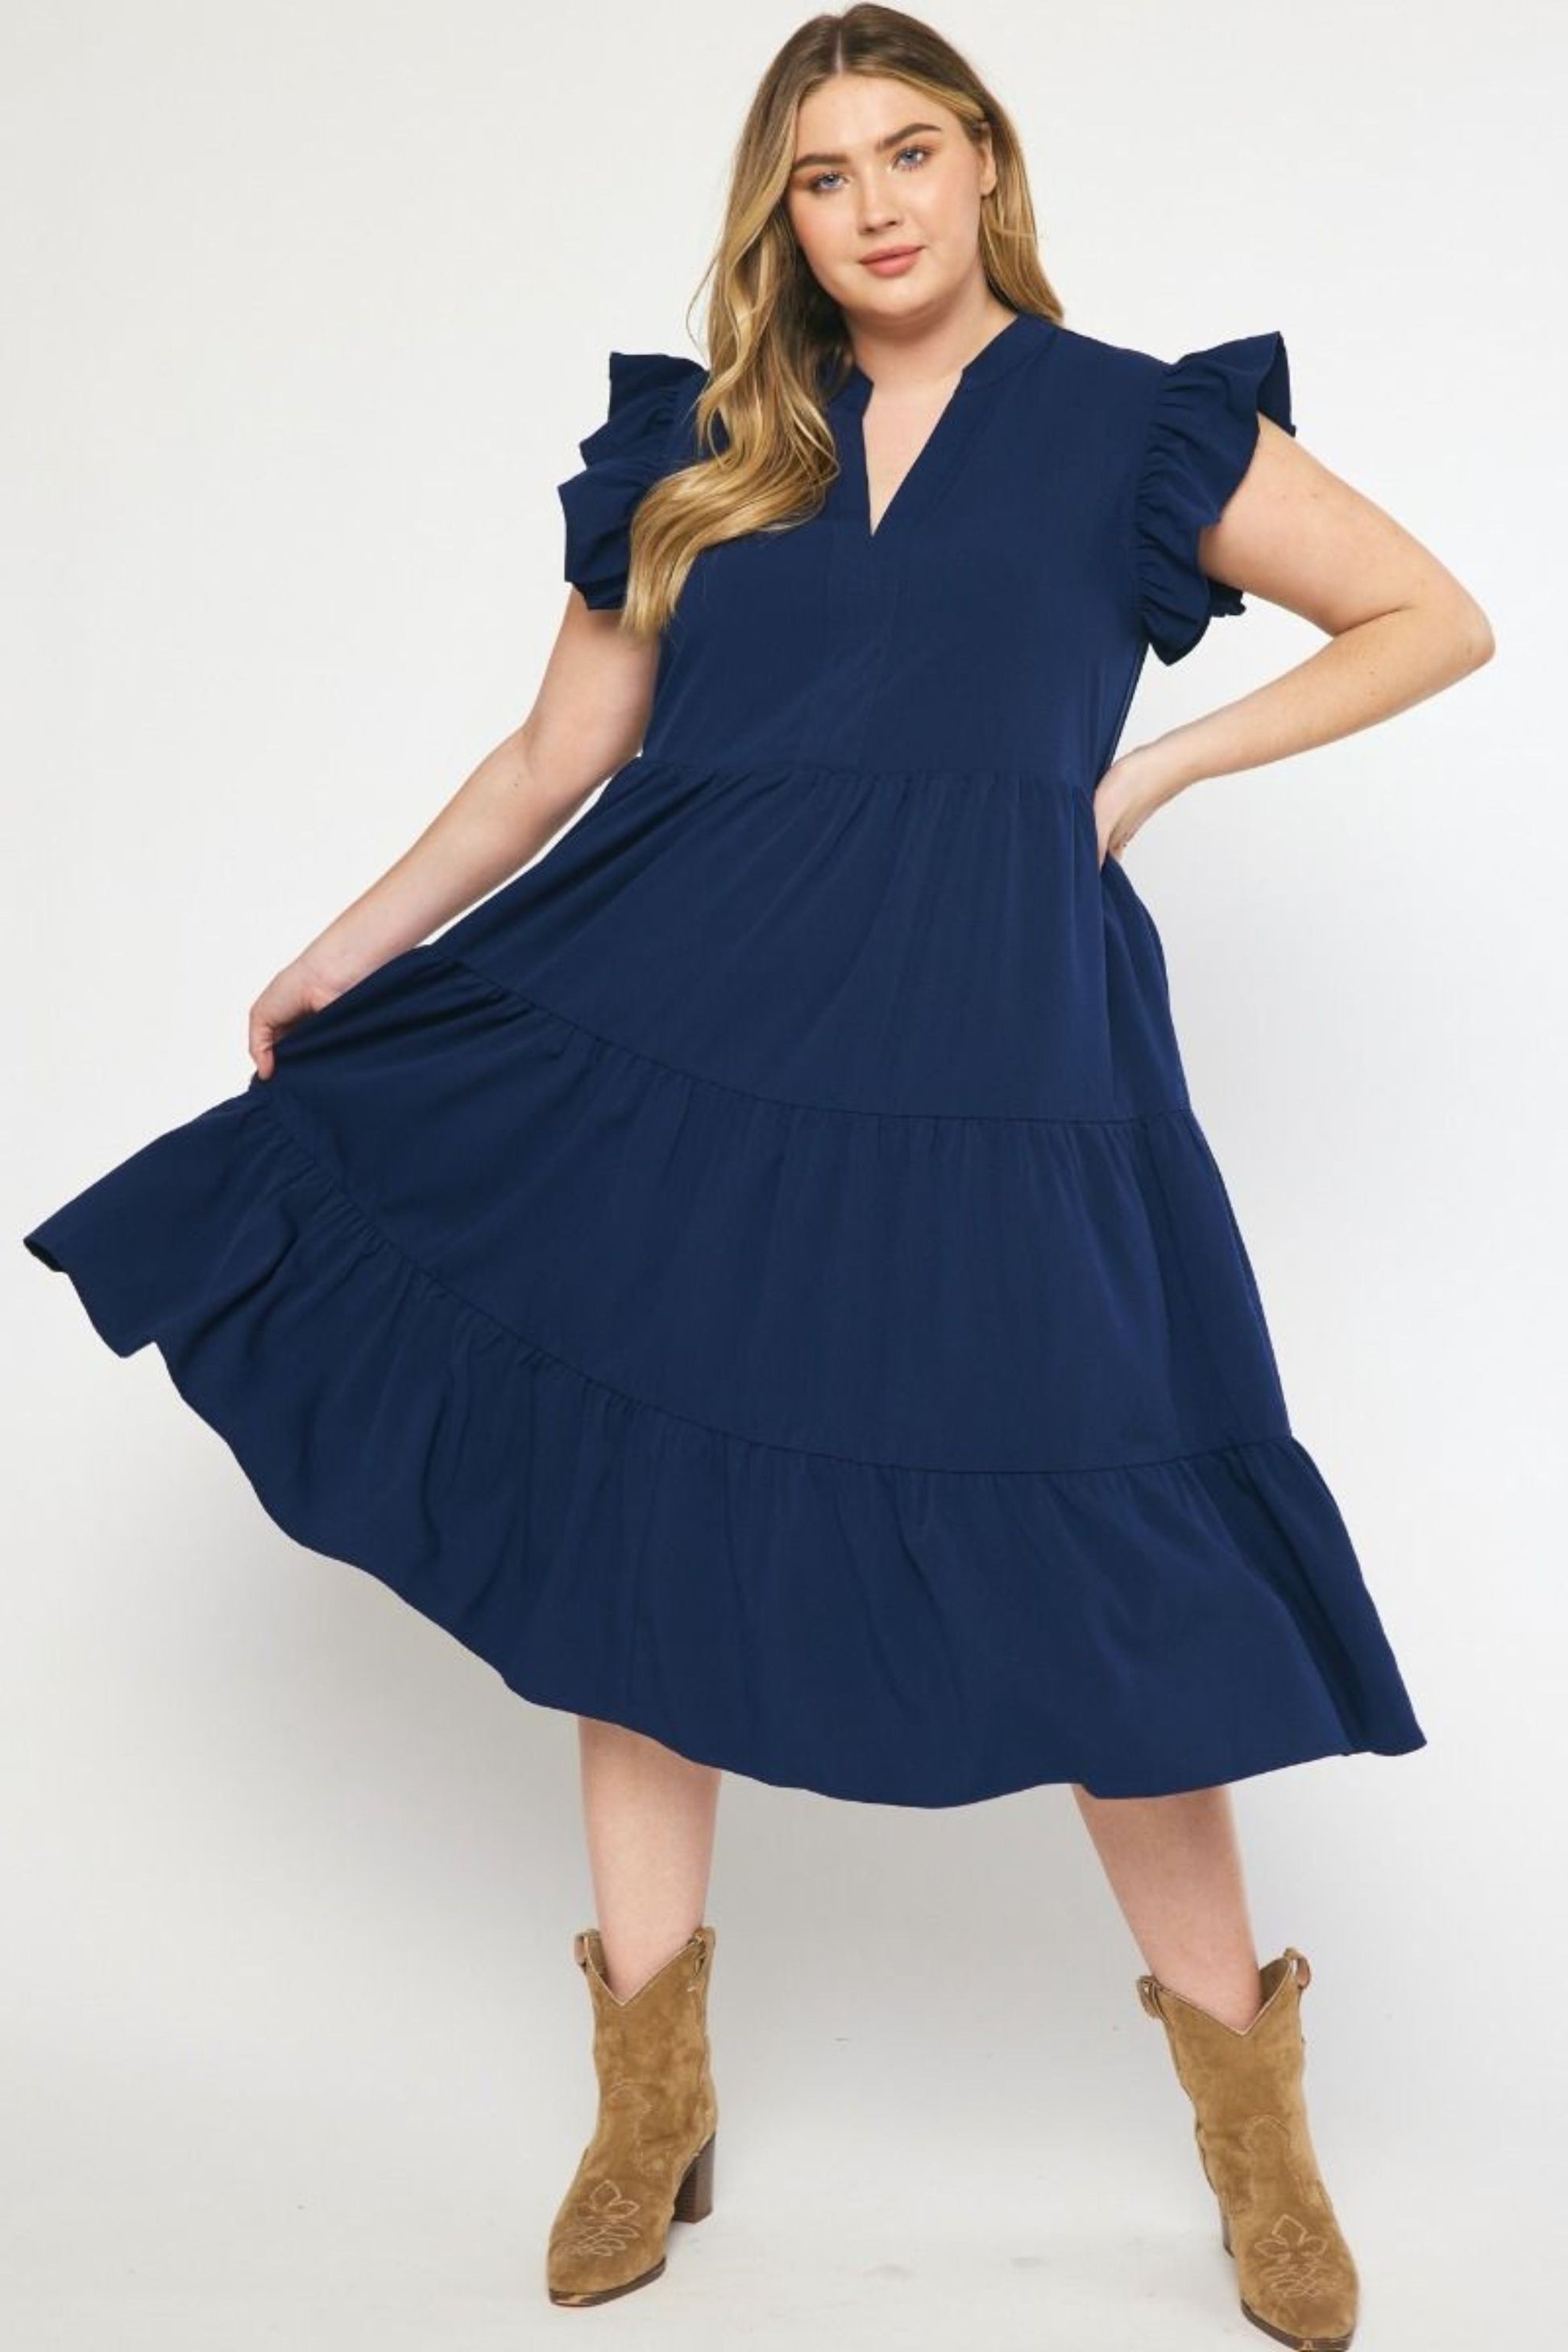 Navy Ruffle Midi Dress - Simply Polished Boutique